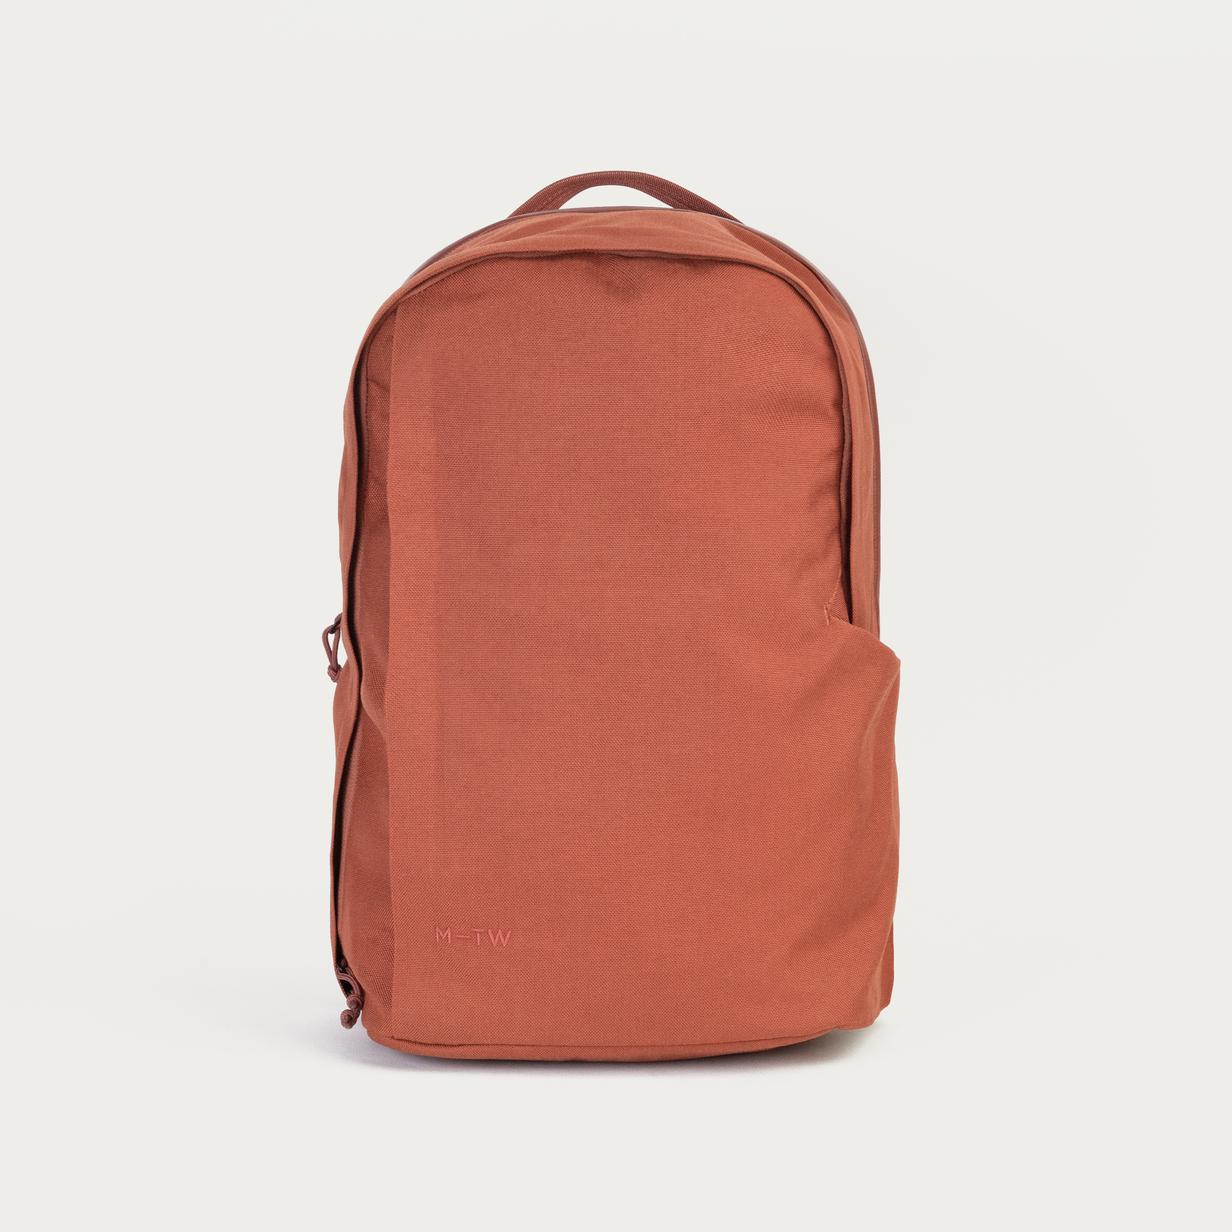 Moment MTW backpack clay 21 L 01